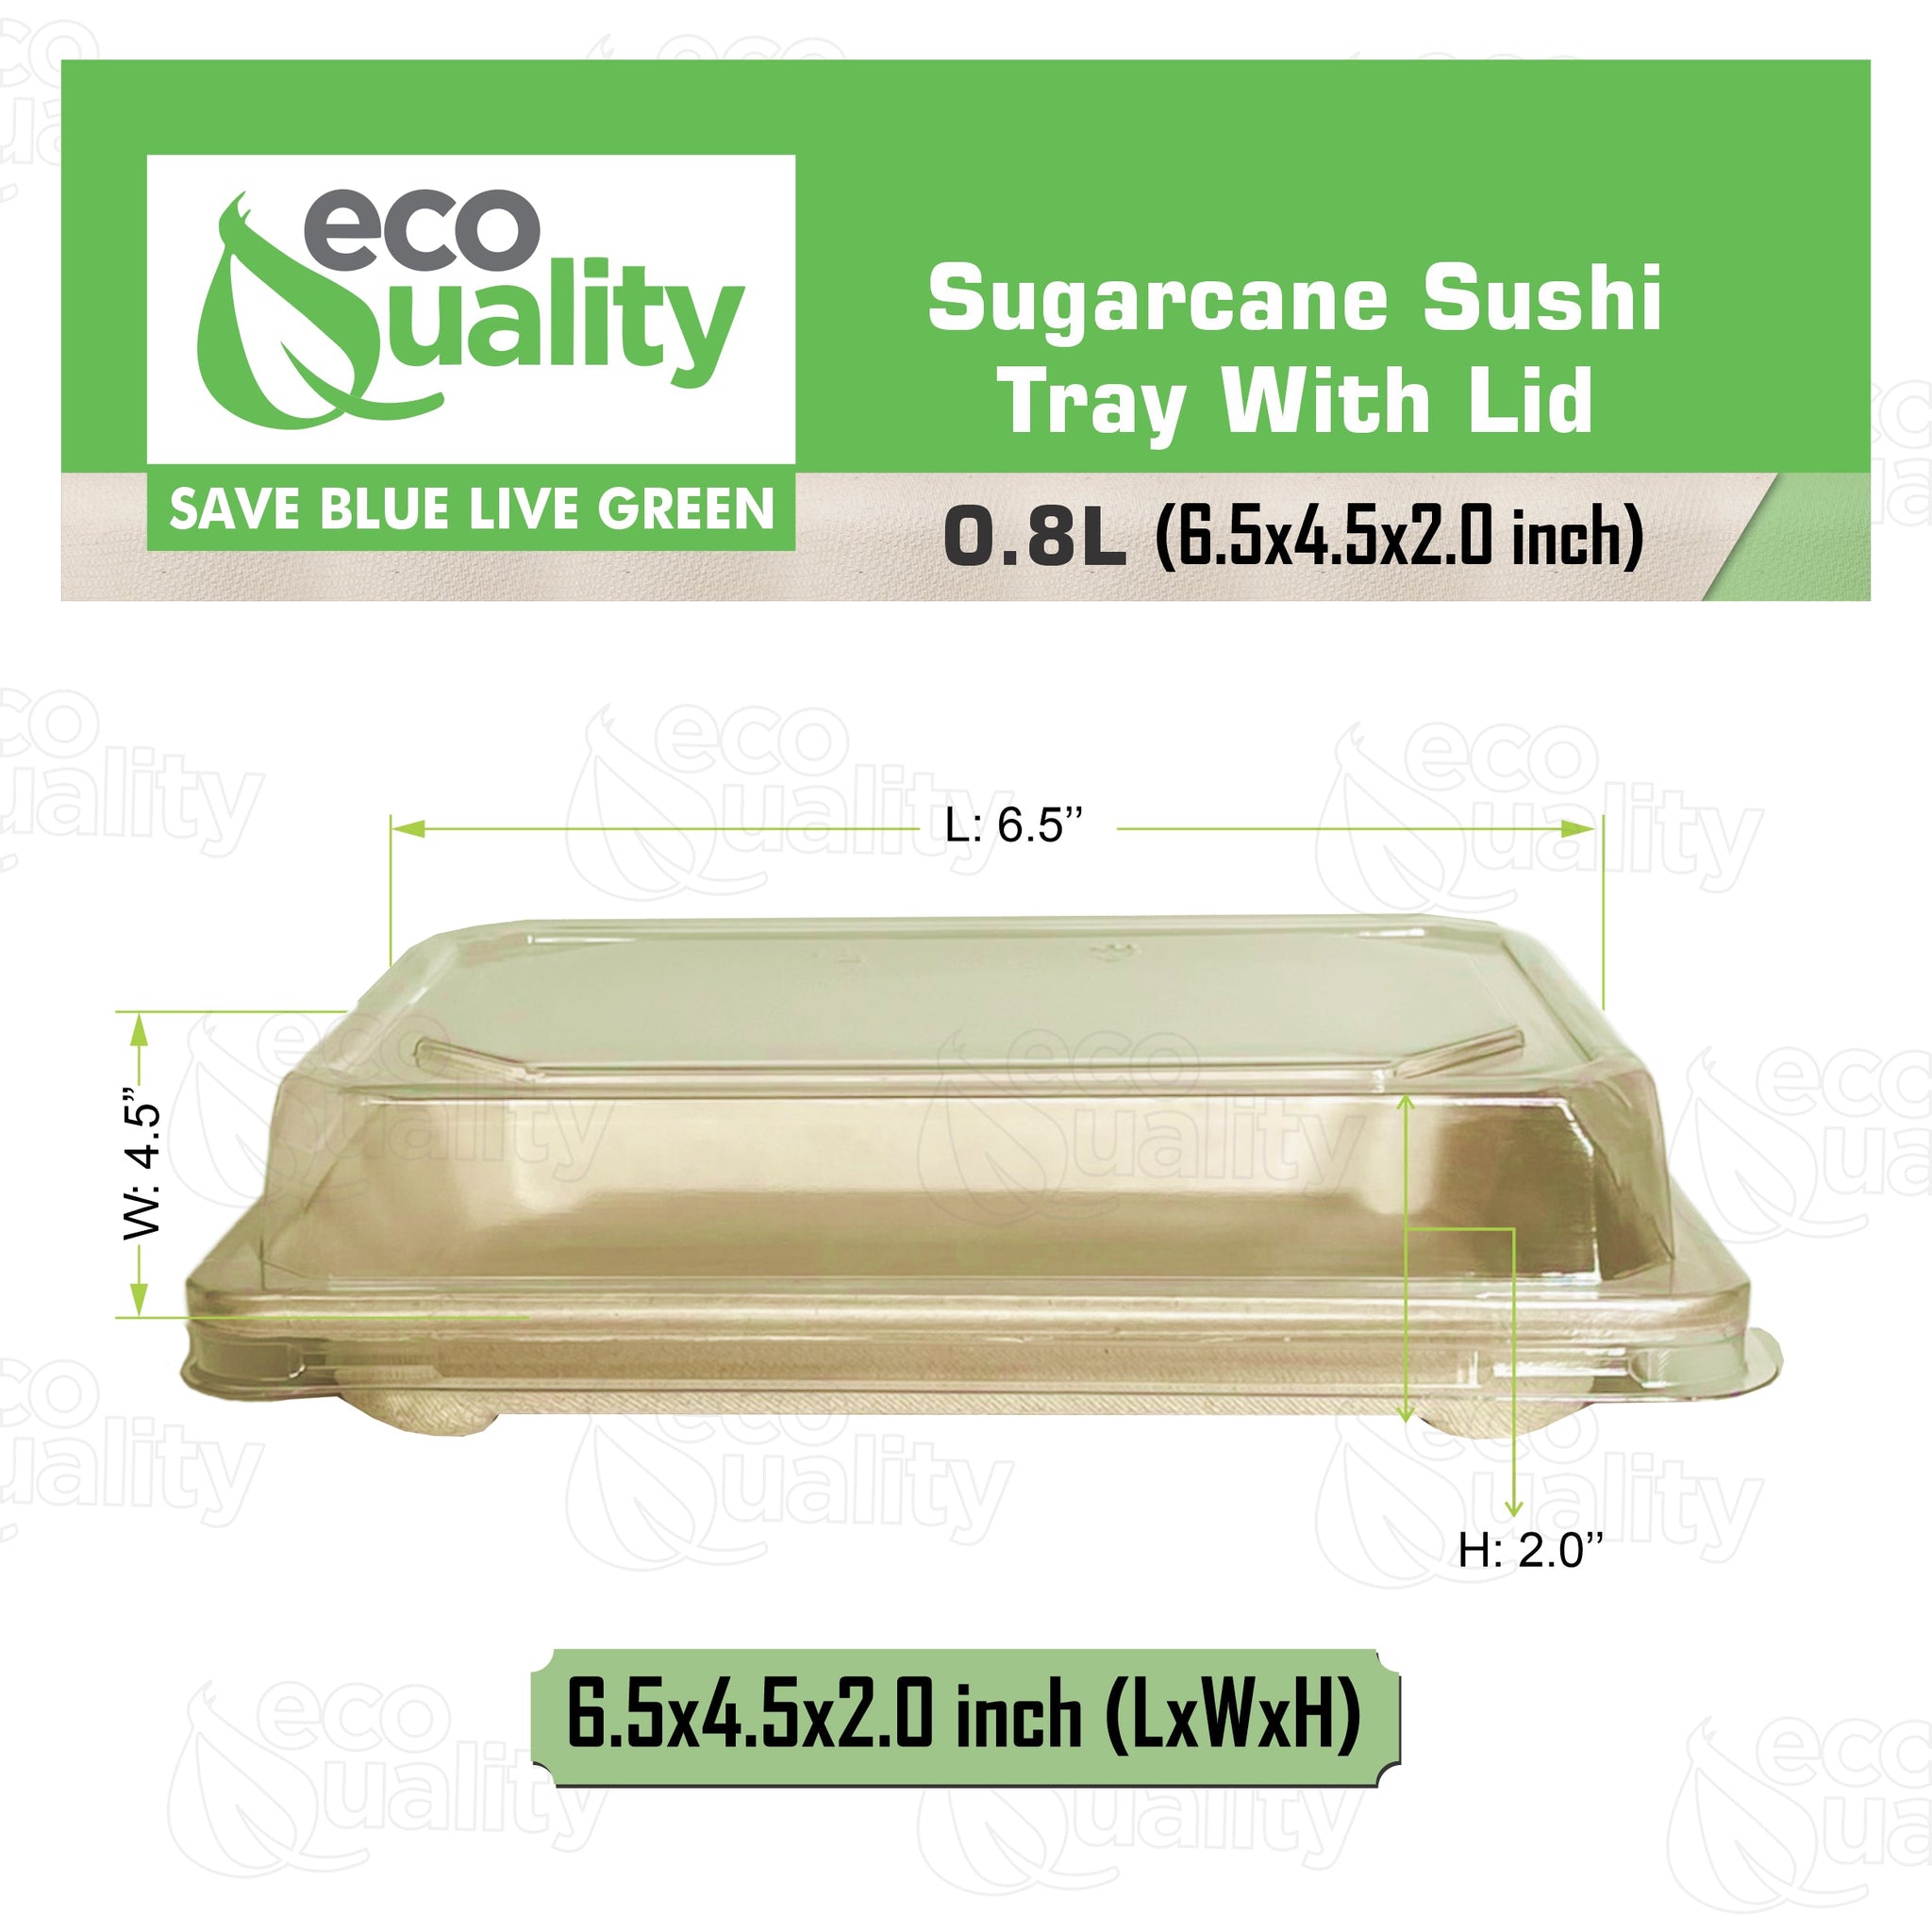 Compostable Packaging, Sustainable Sushi Tray, Eco-Friendly Food Packaging, Biodegradable Sushi Platter, Green Packaging Solution, Environmentally Friendly Tray, Zero-Waste Sushi Packaging, Bioplastics Sushi Tray, Earth-Friendly Sushi Container, Organic Waste Composting, Biodegradable Food Service, Natural Fiber Sushi Platter, Eco-conscious Sushi Packaging, Compostable Takeout Container